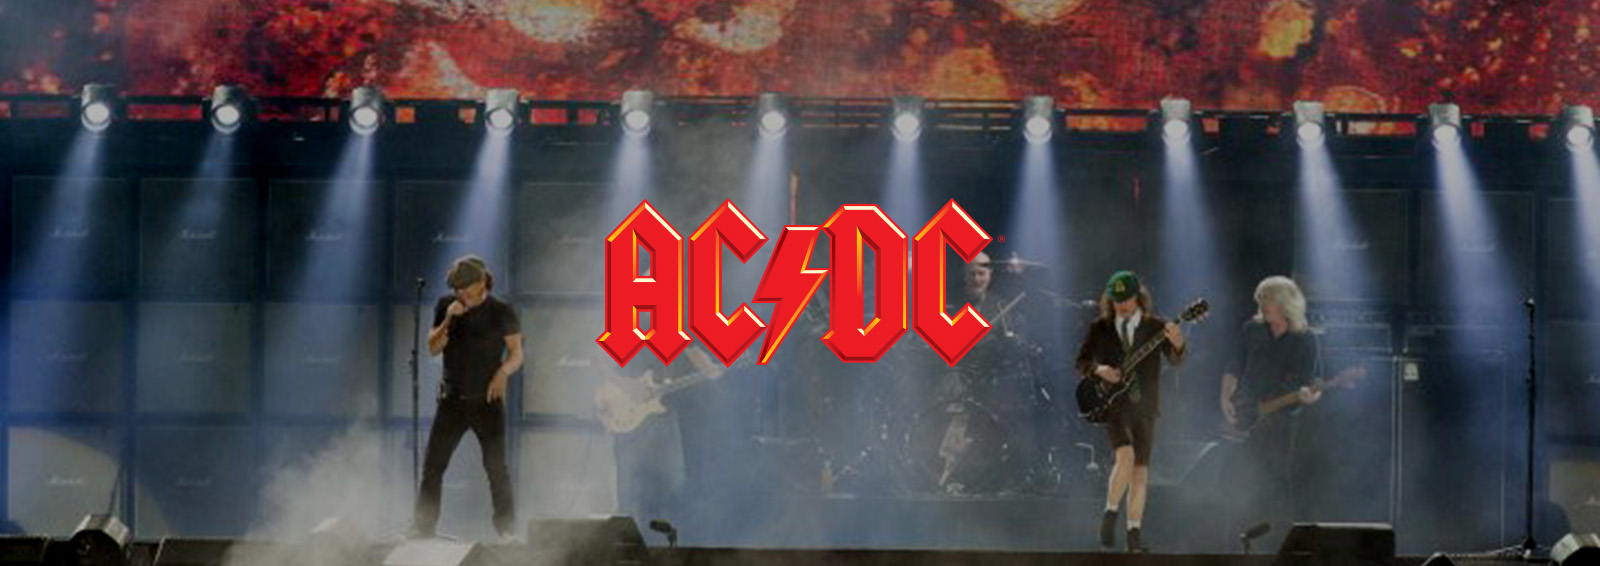 ACDC_Banner